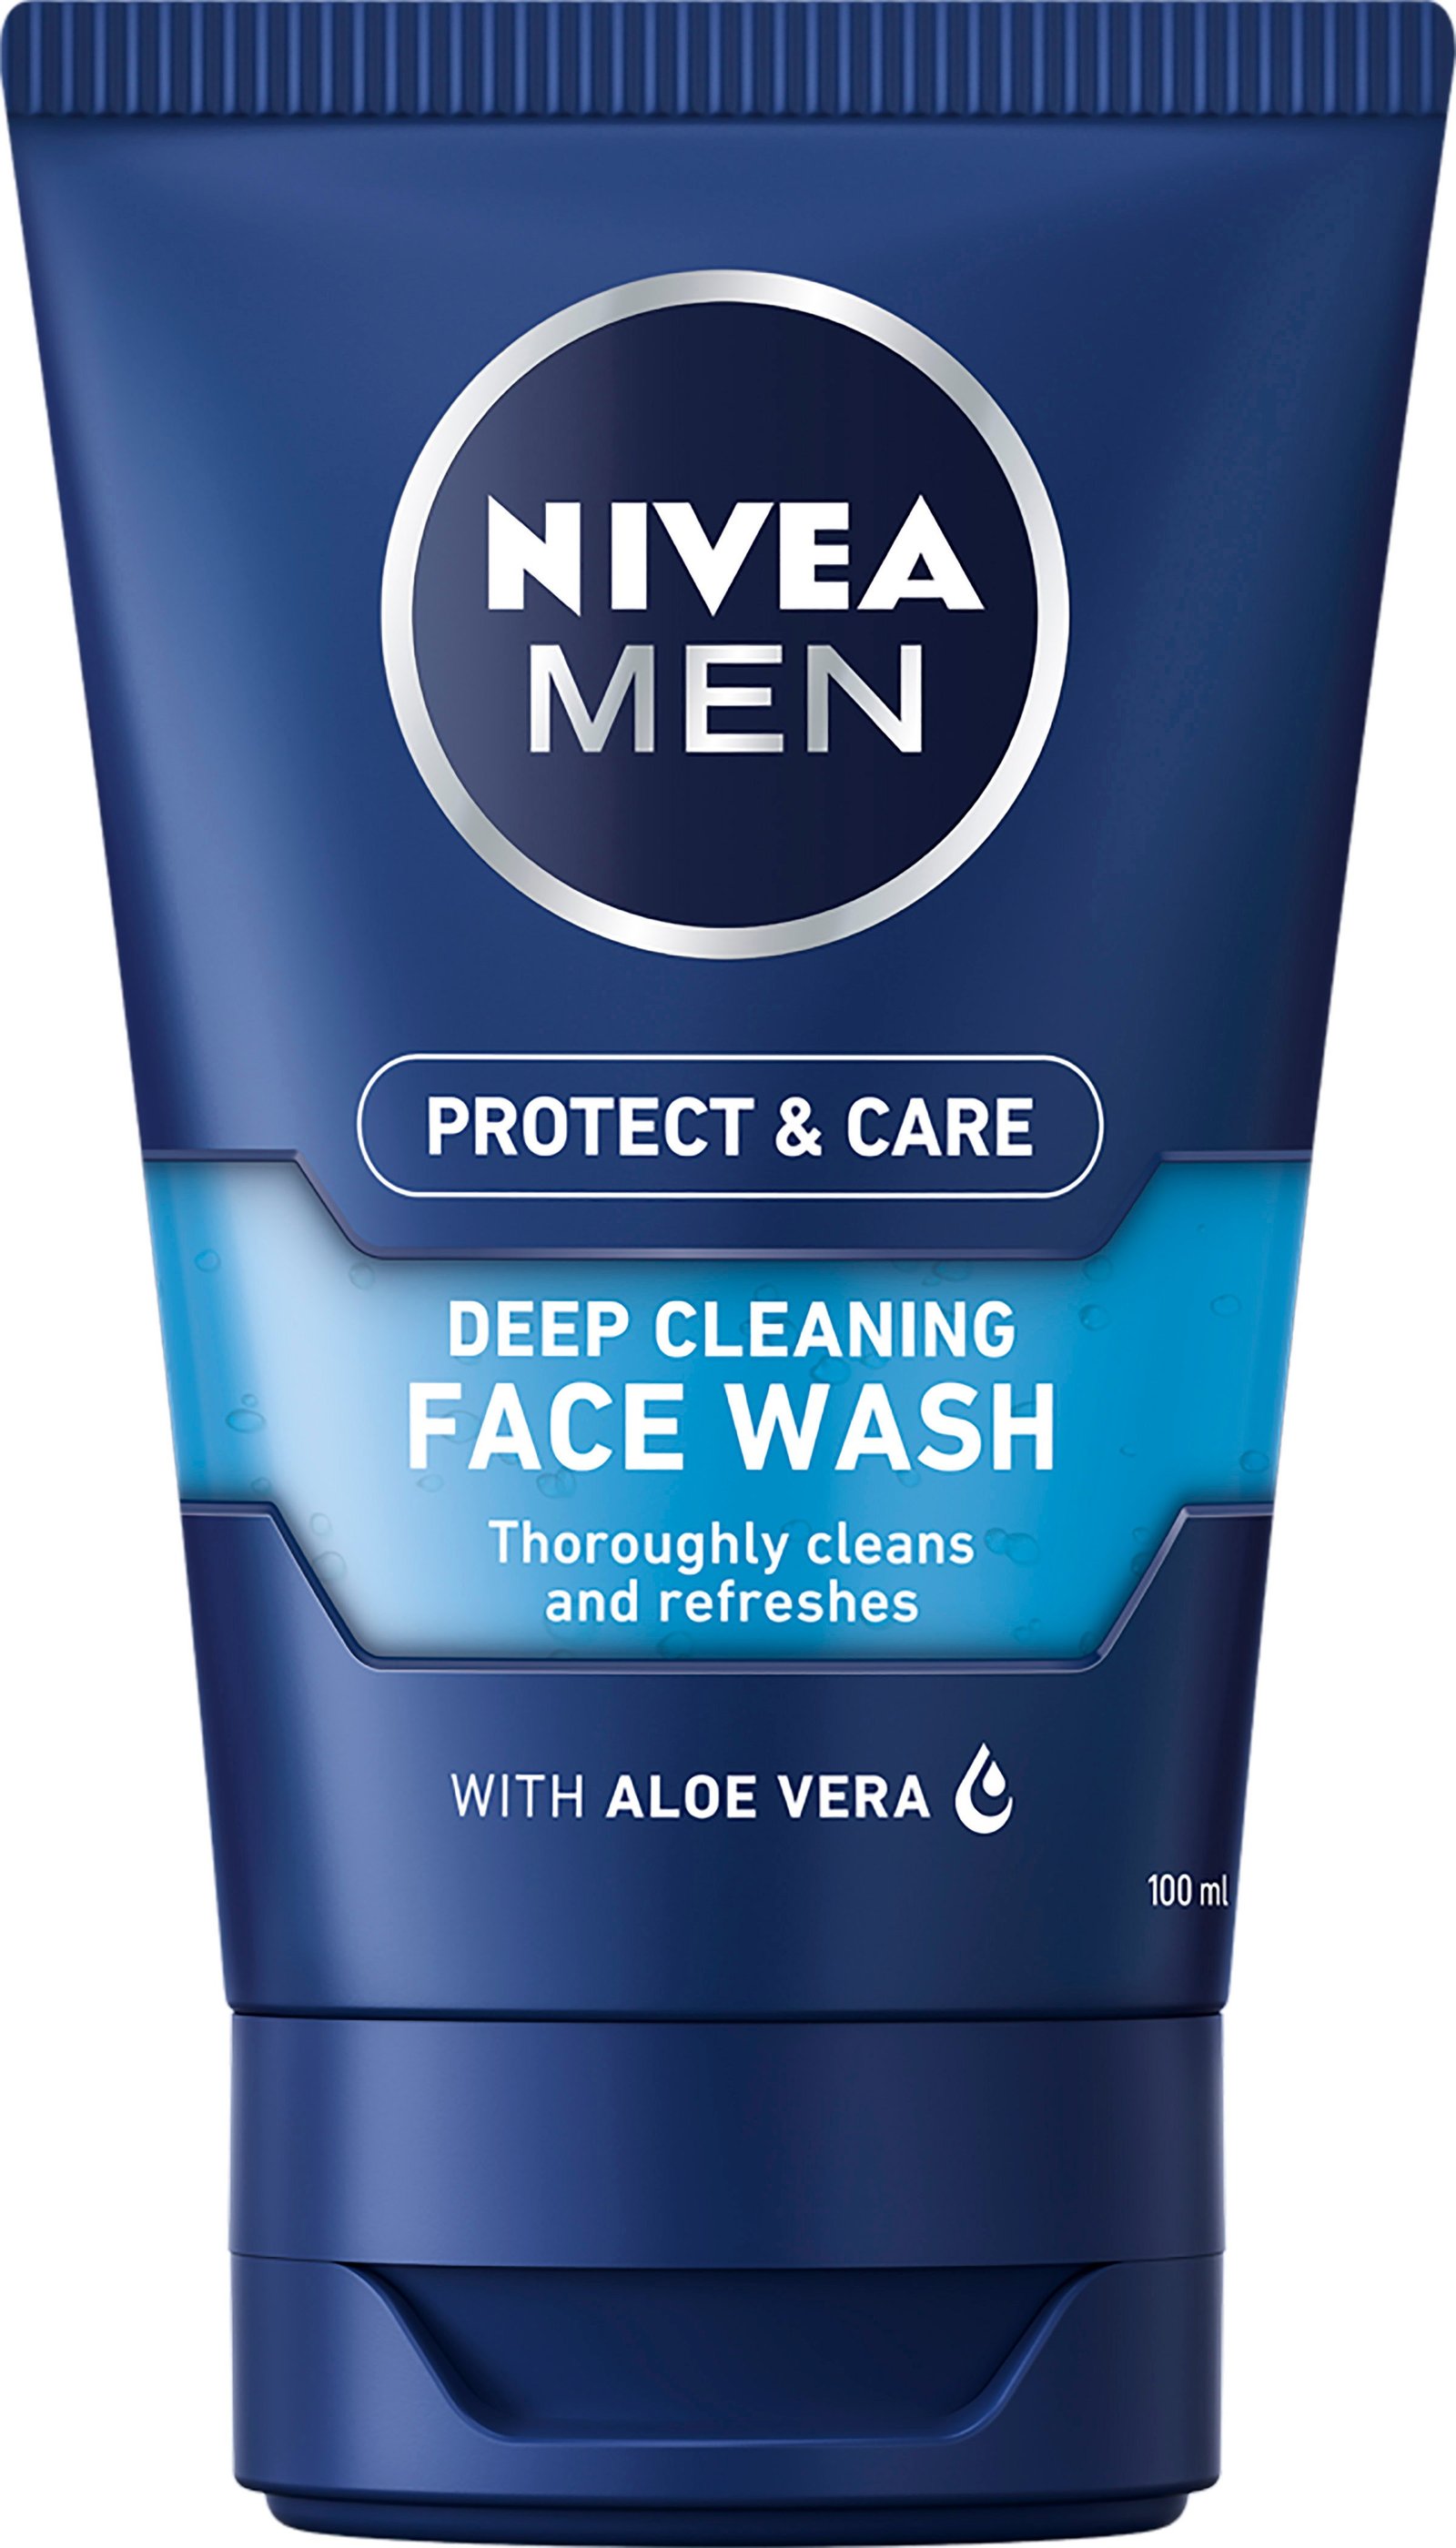 NIVEA MEN Protect & Care Deep Cleansing Face Wash 100 ml